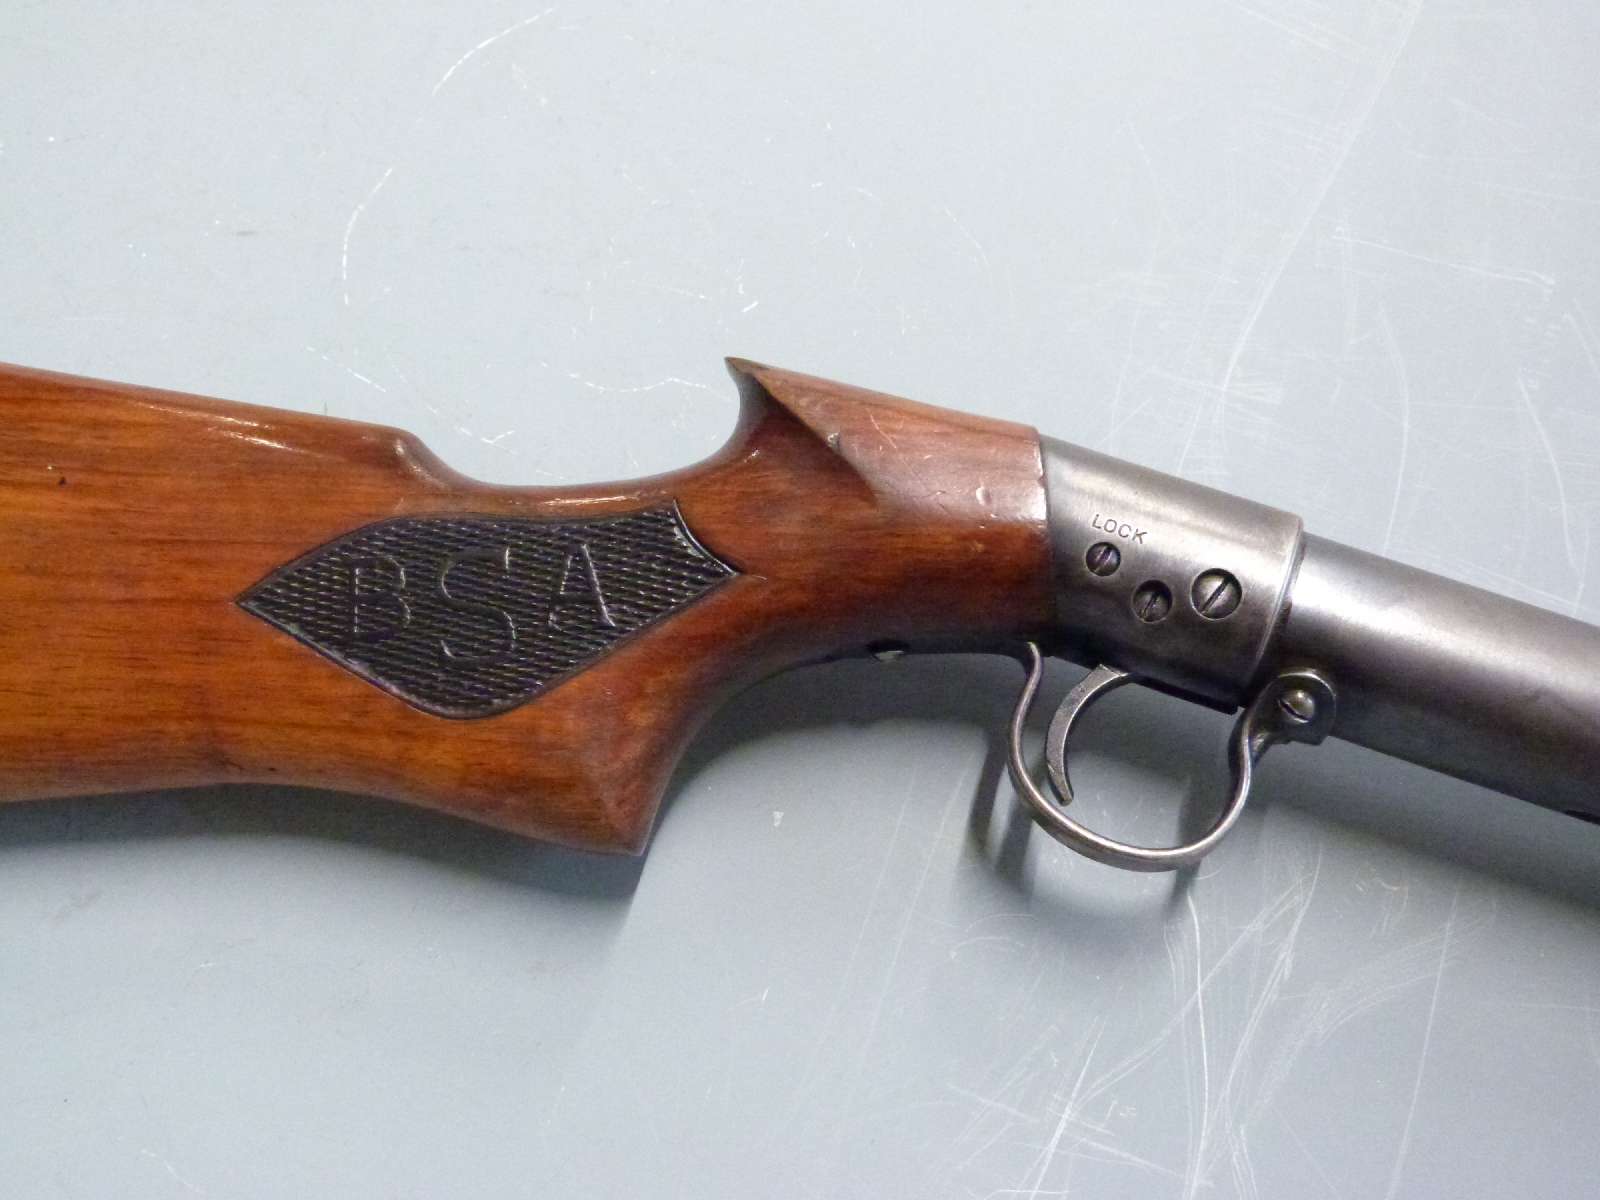 BSA Standard No.2 .22 air rifle with monogrammed chequered grip, adjustable trigger, named barrel - Image 2 of 3